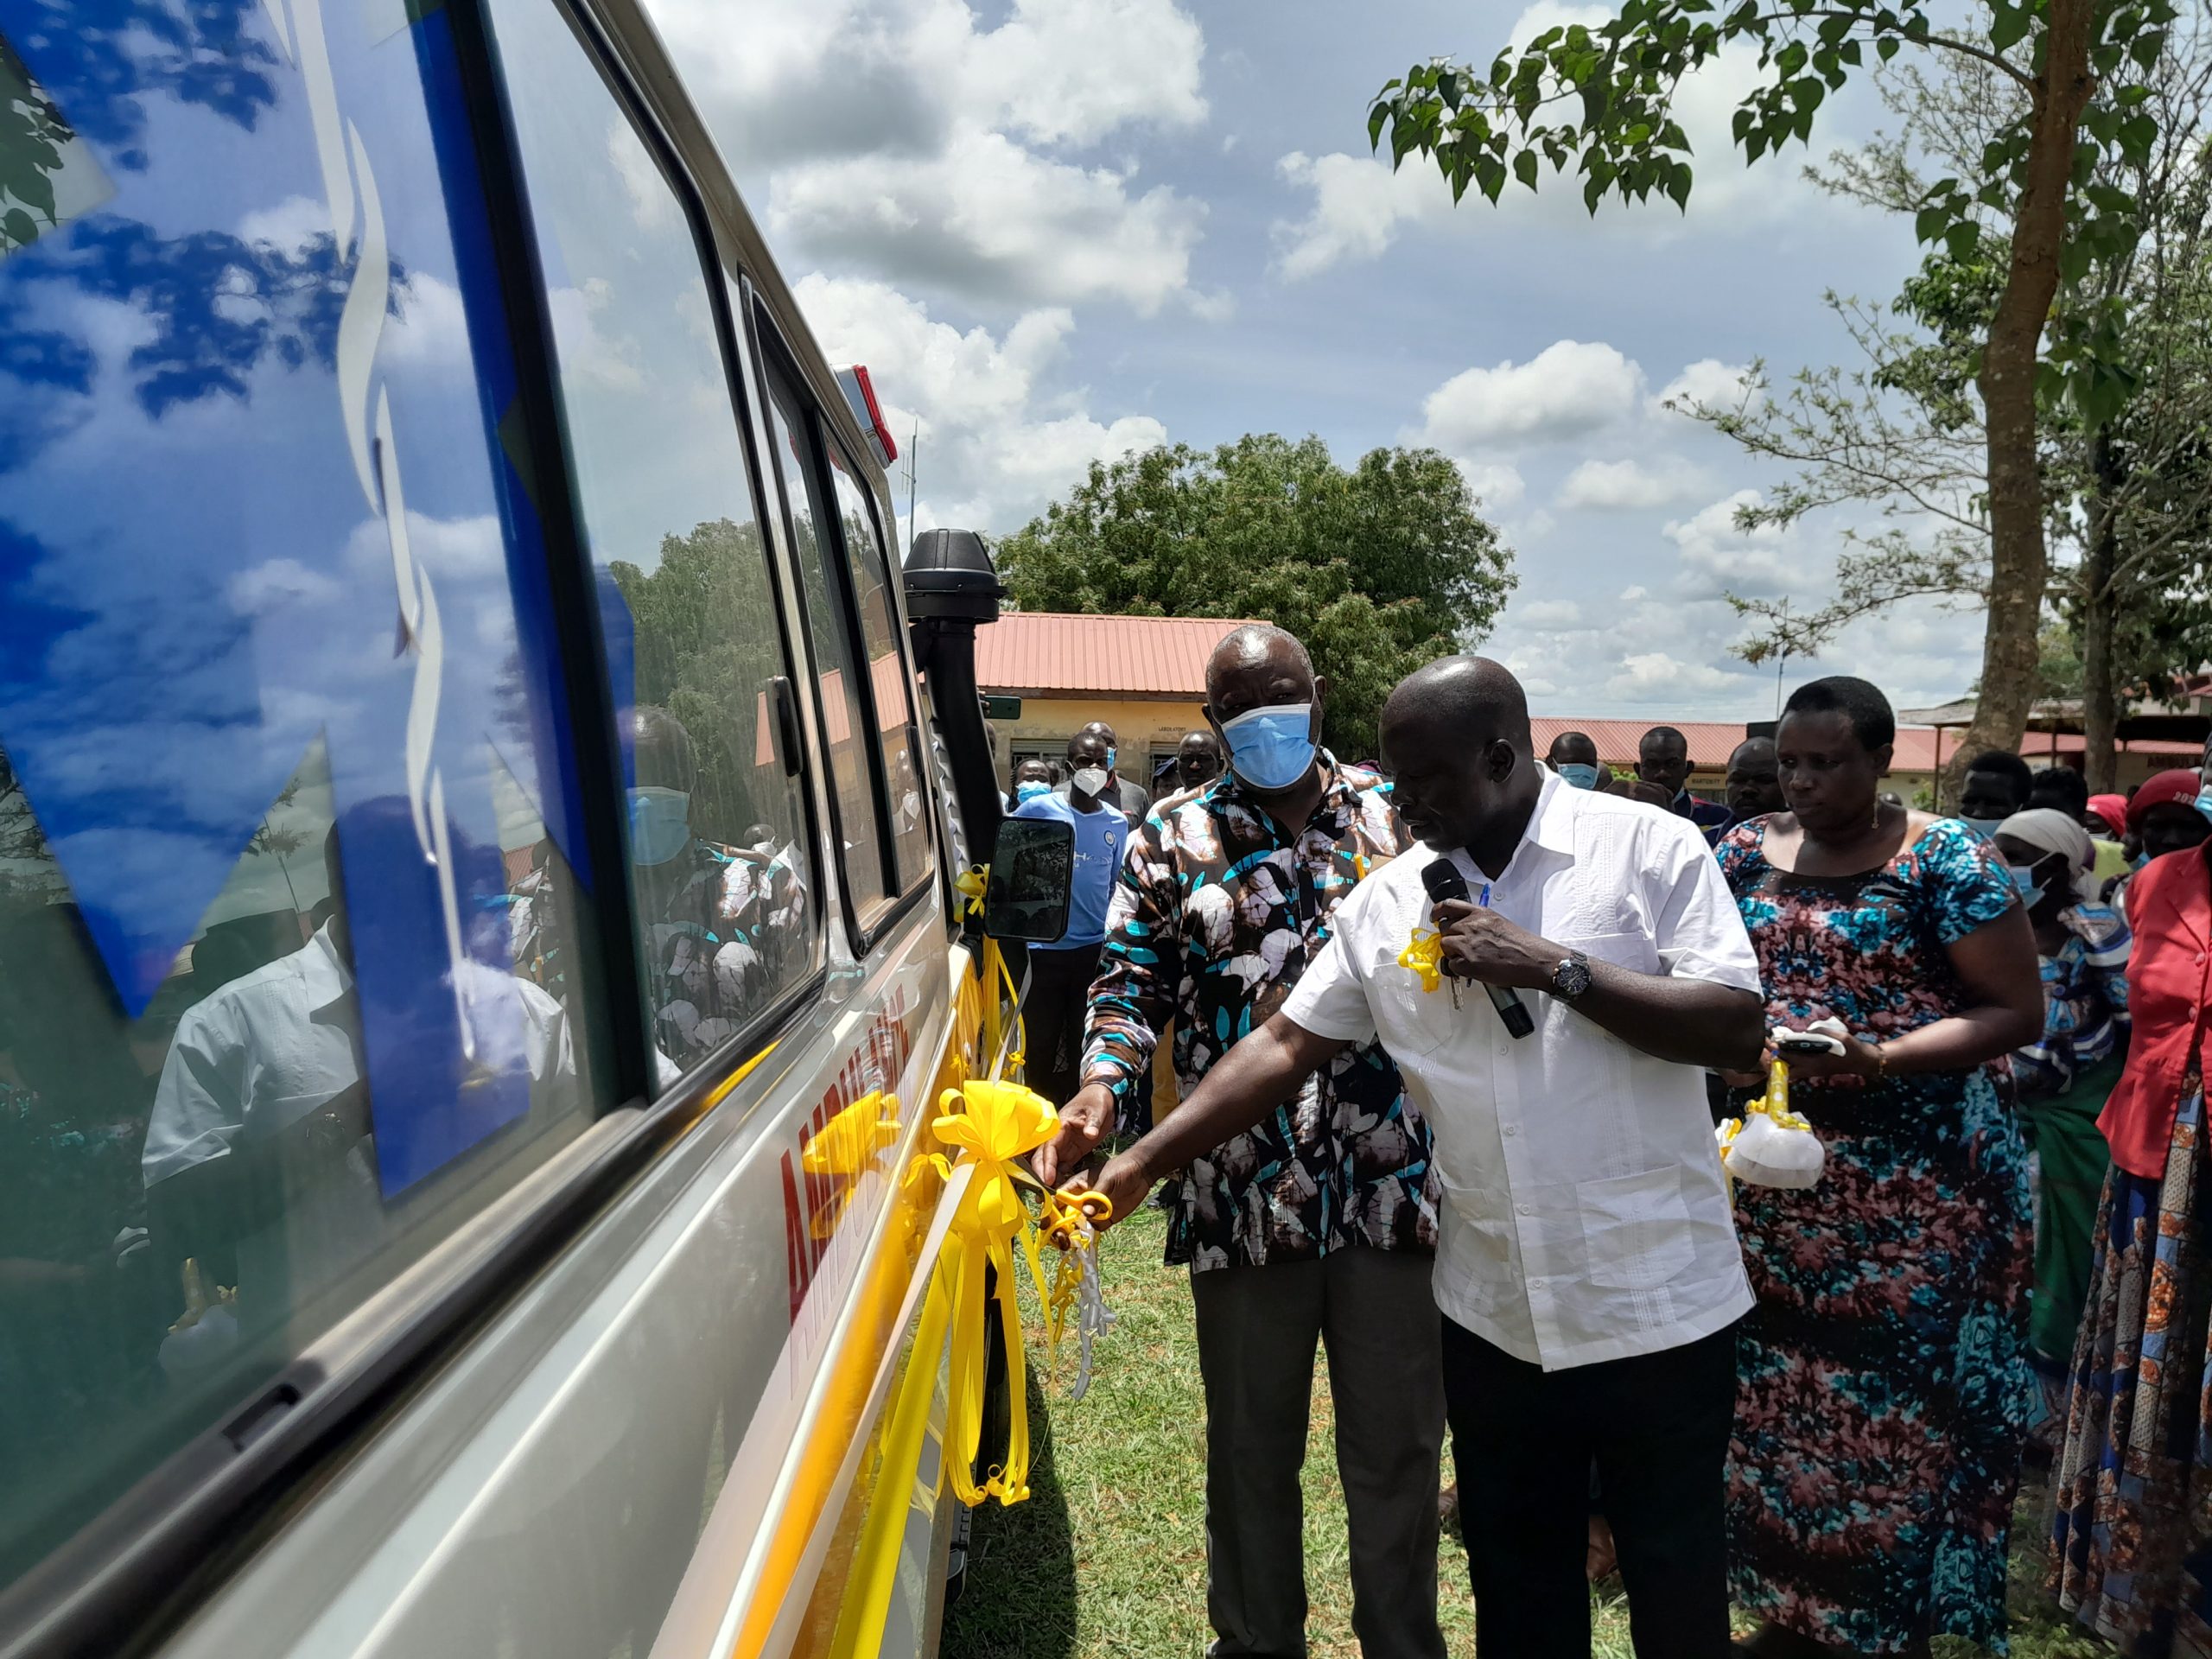 Minister Ongalo Hands Over UGX228M Ambulance to Kalaki District, Blasts Corrupt Officials